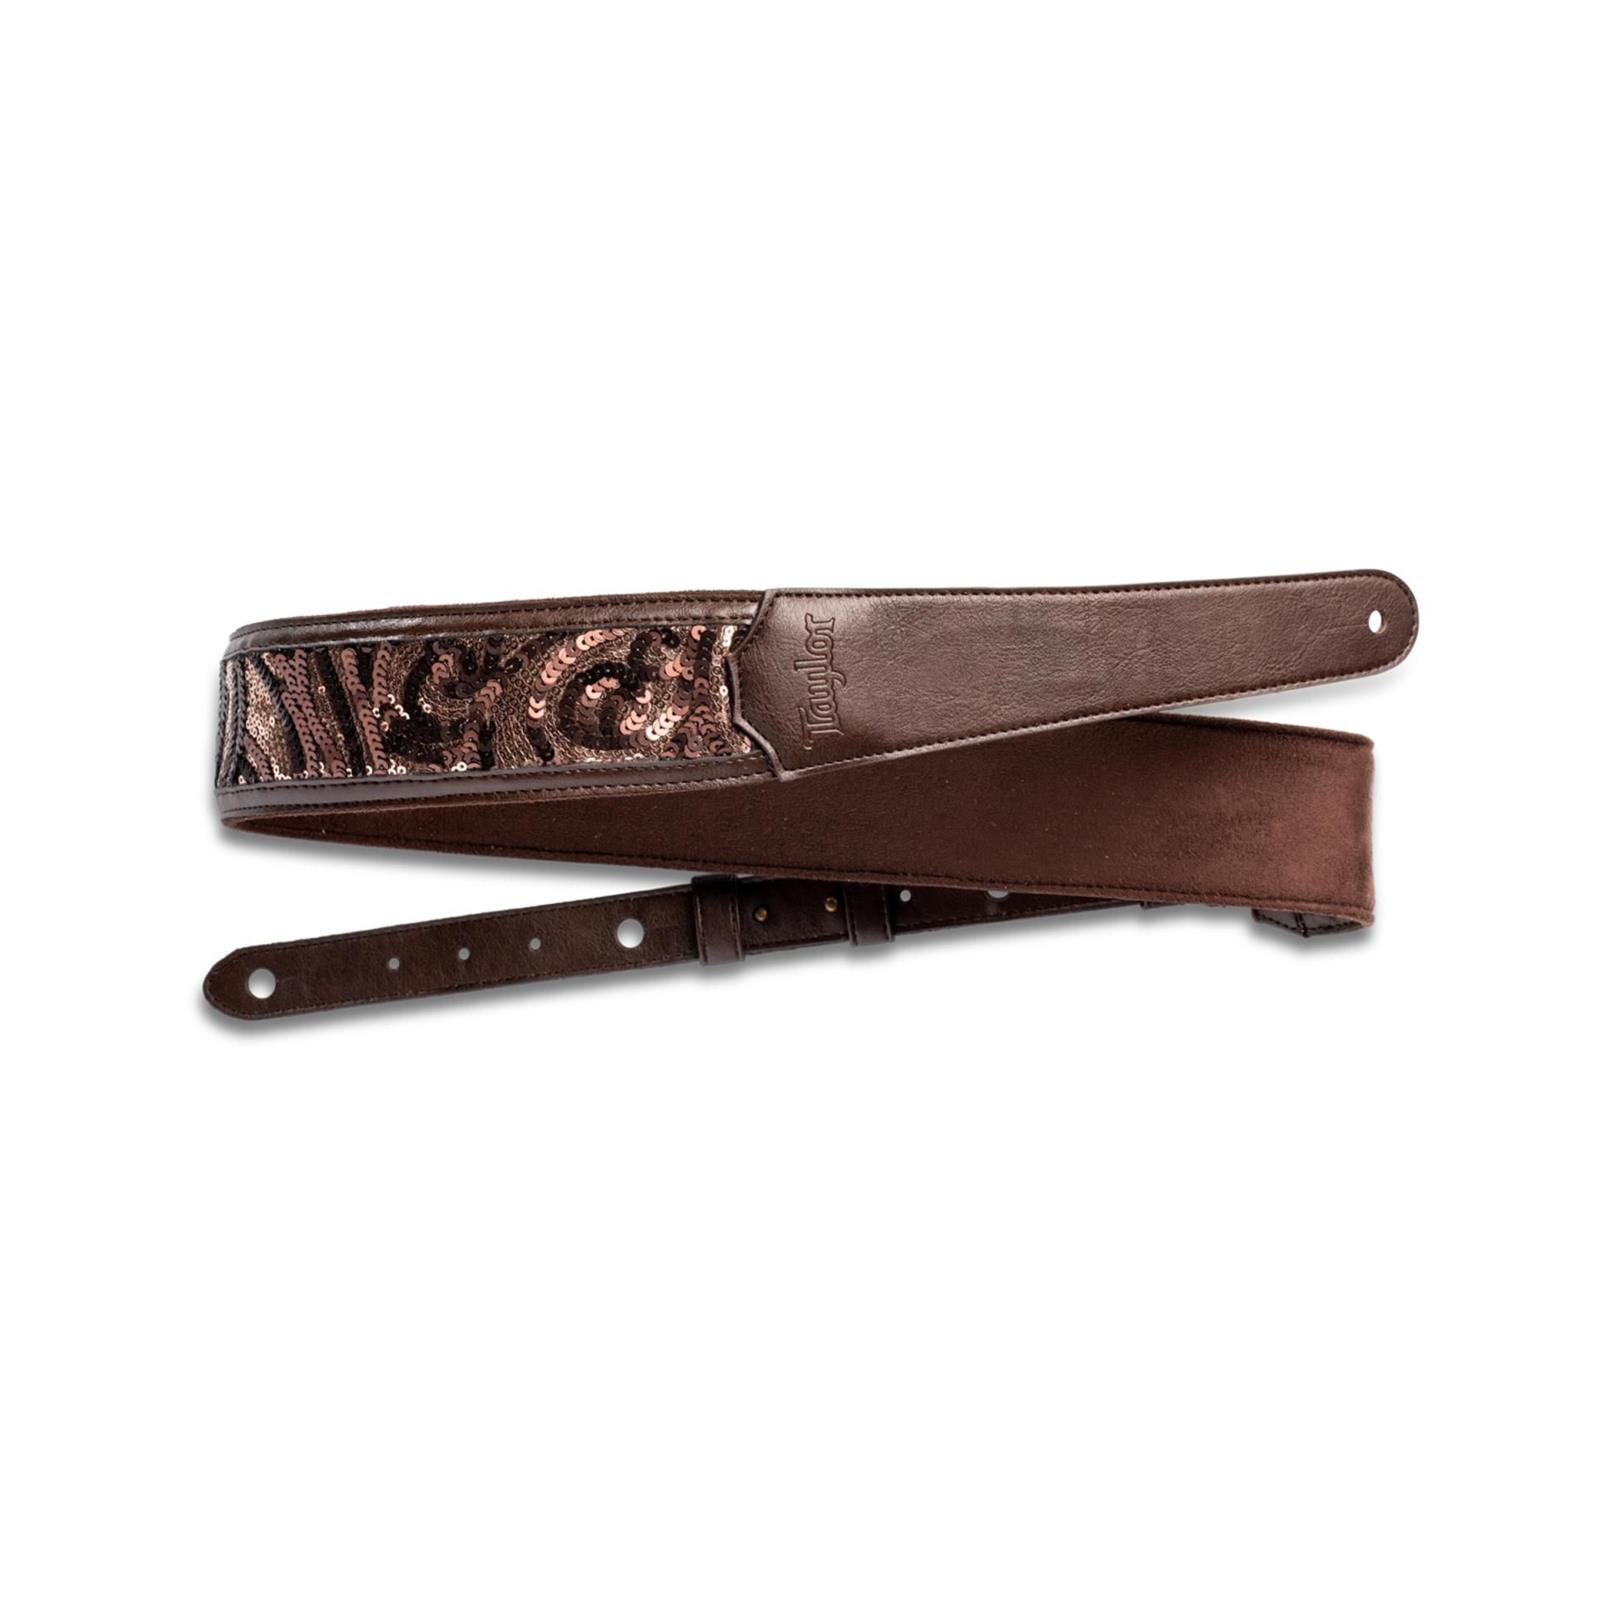 Taylor Vegan Leather Strap, Chocolate Brown w/ Sequins,2.25",Embossed Logo